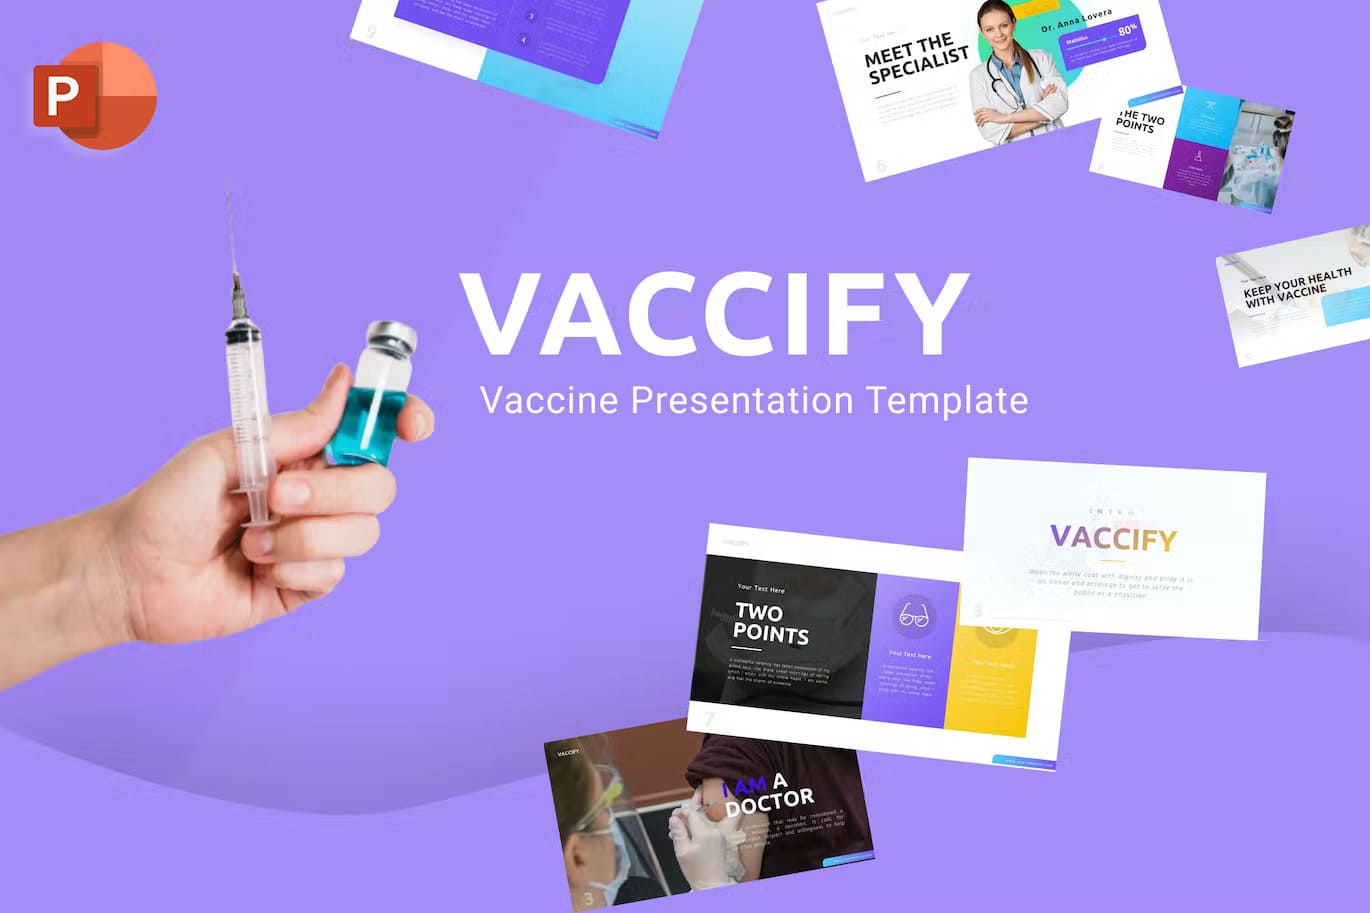 Specialist of the vaccify, vaccine.